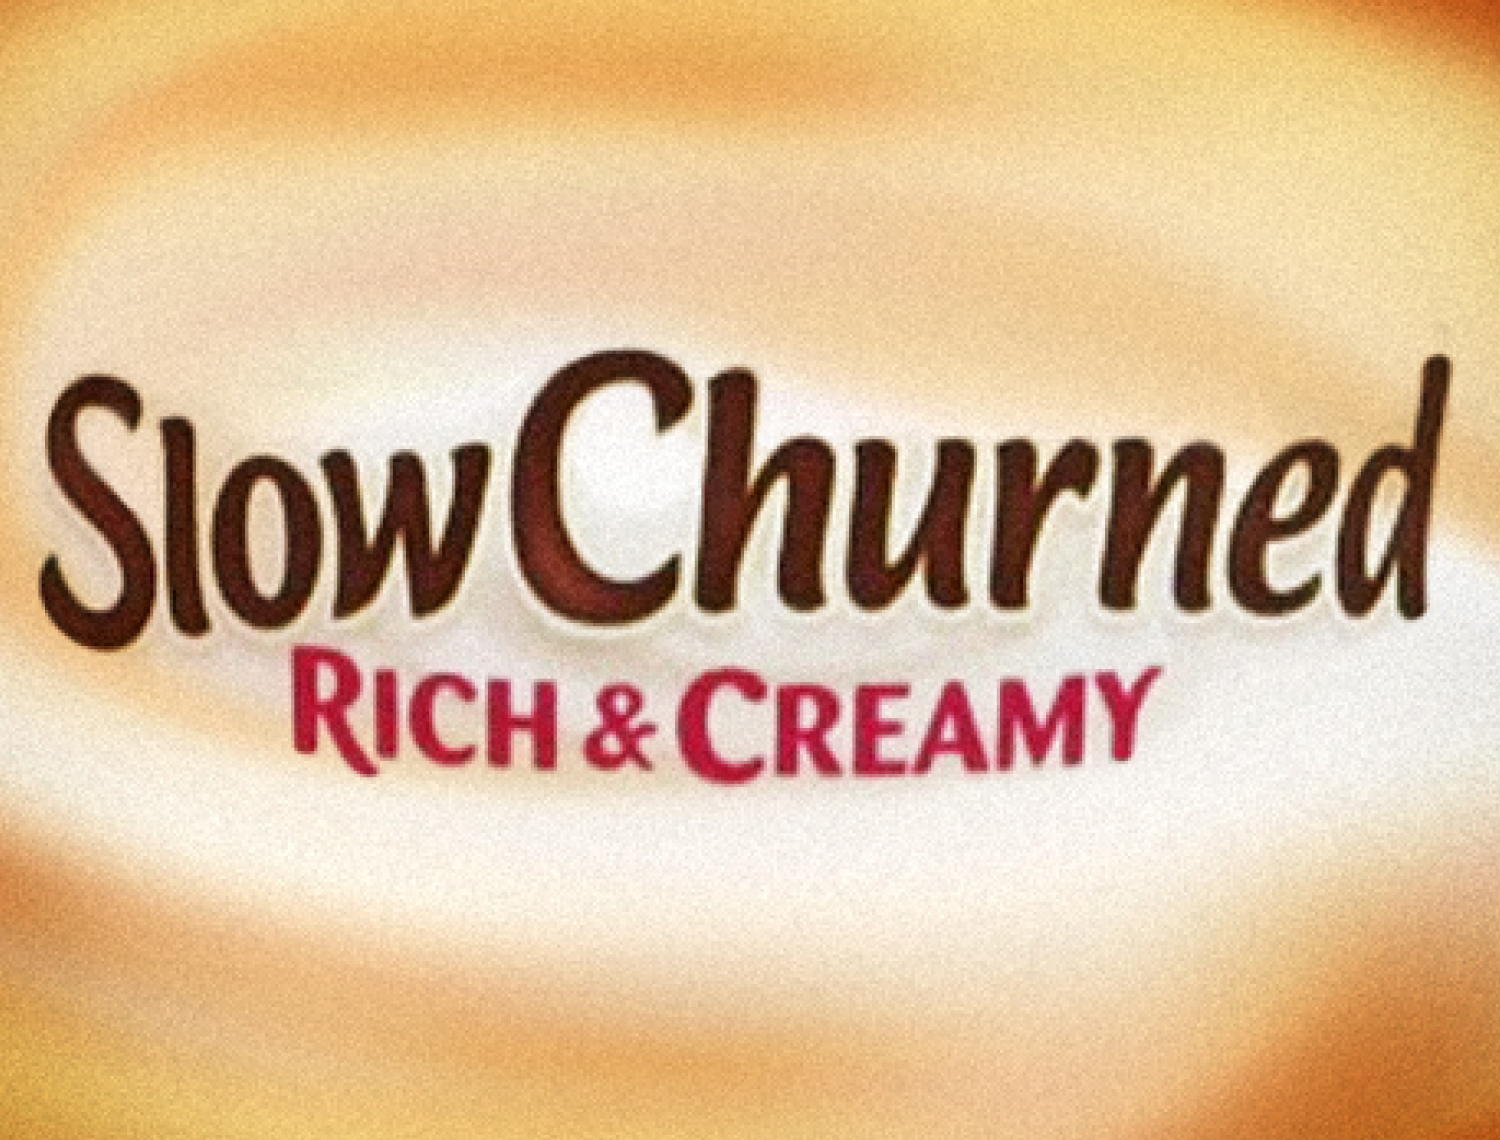 Close up of slow-churned rich & creamy